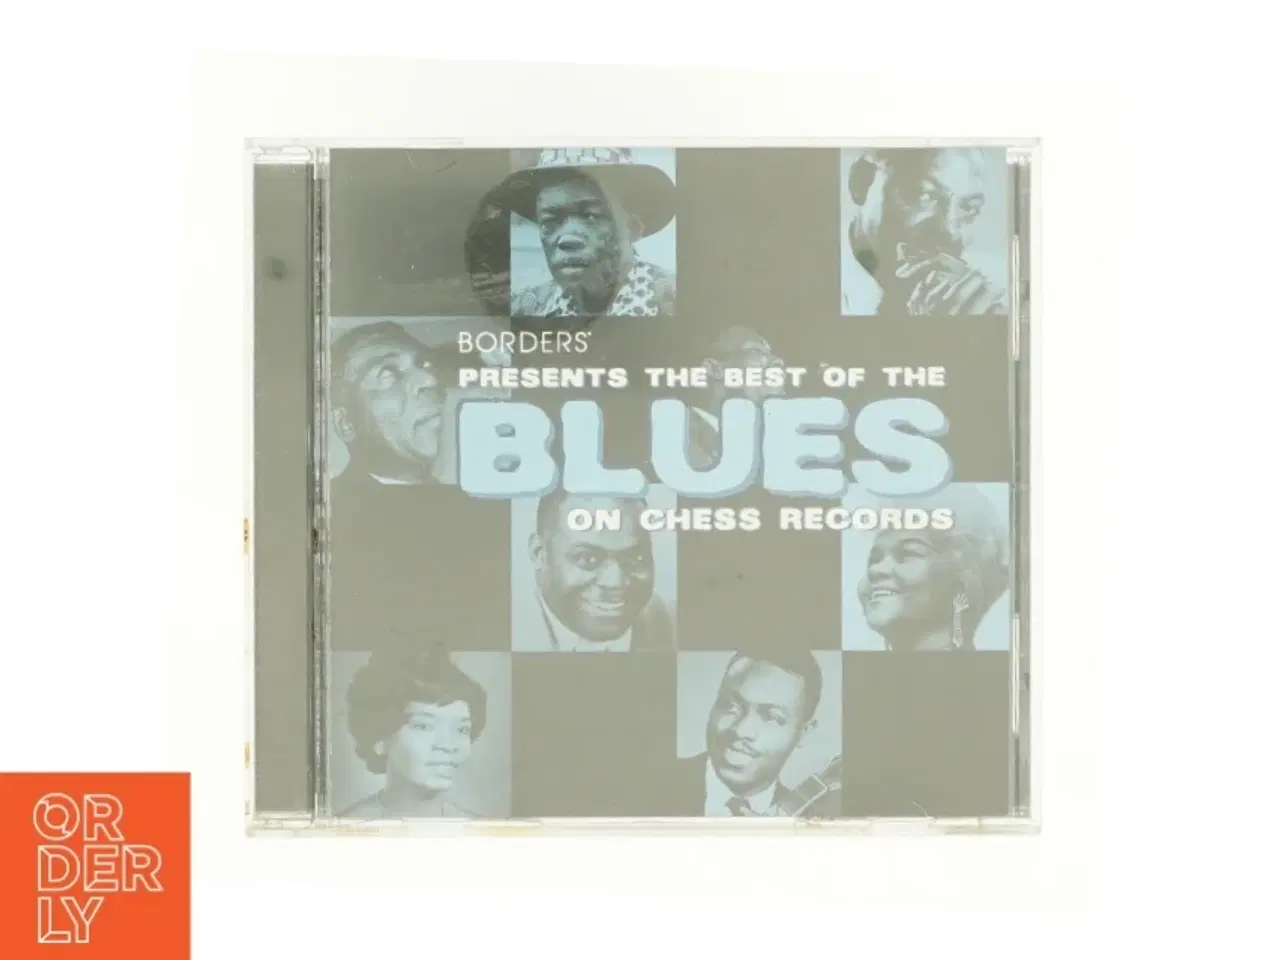 Billede 1 - Borders Presents the Best of Blues on Chess Records fra cd